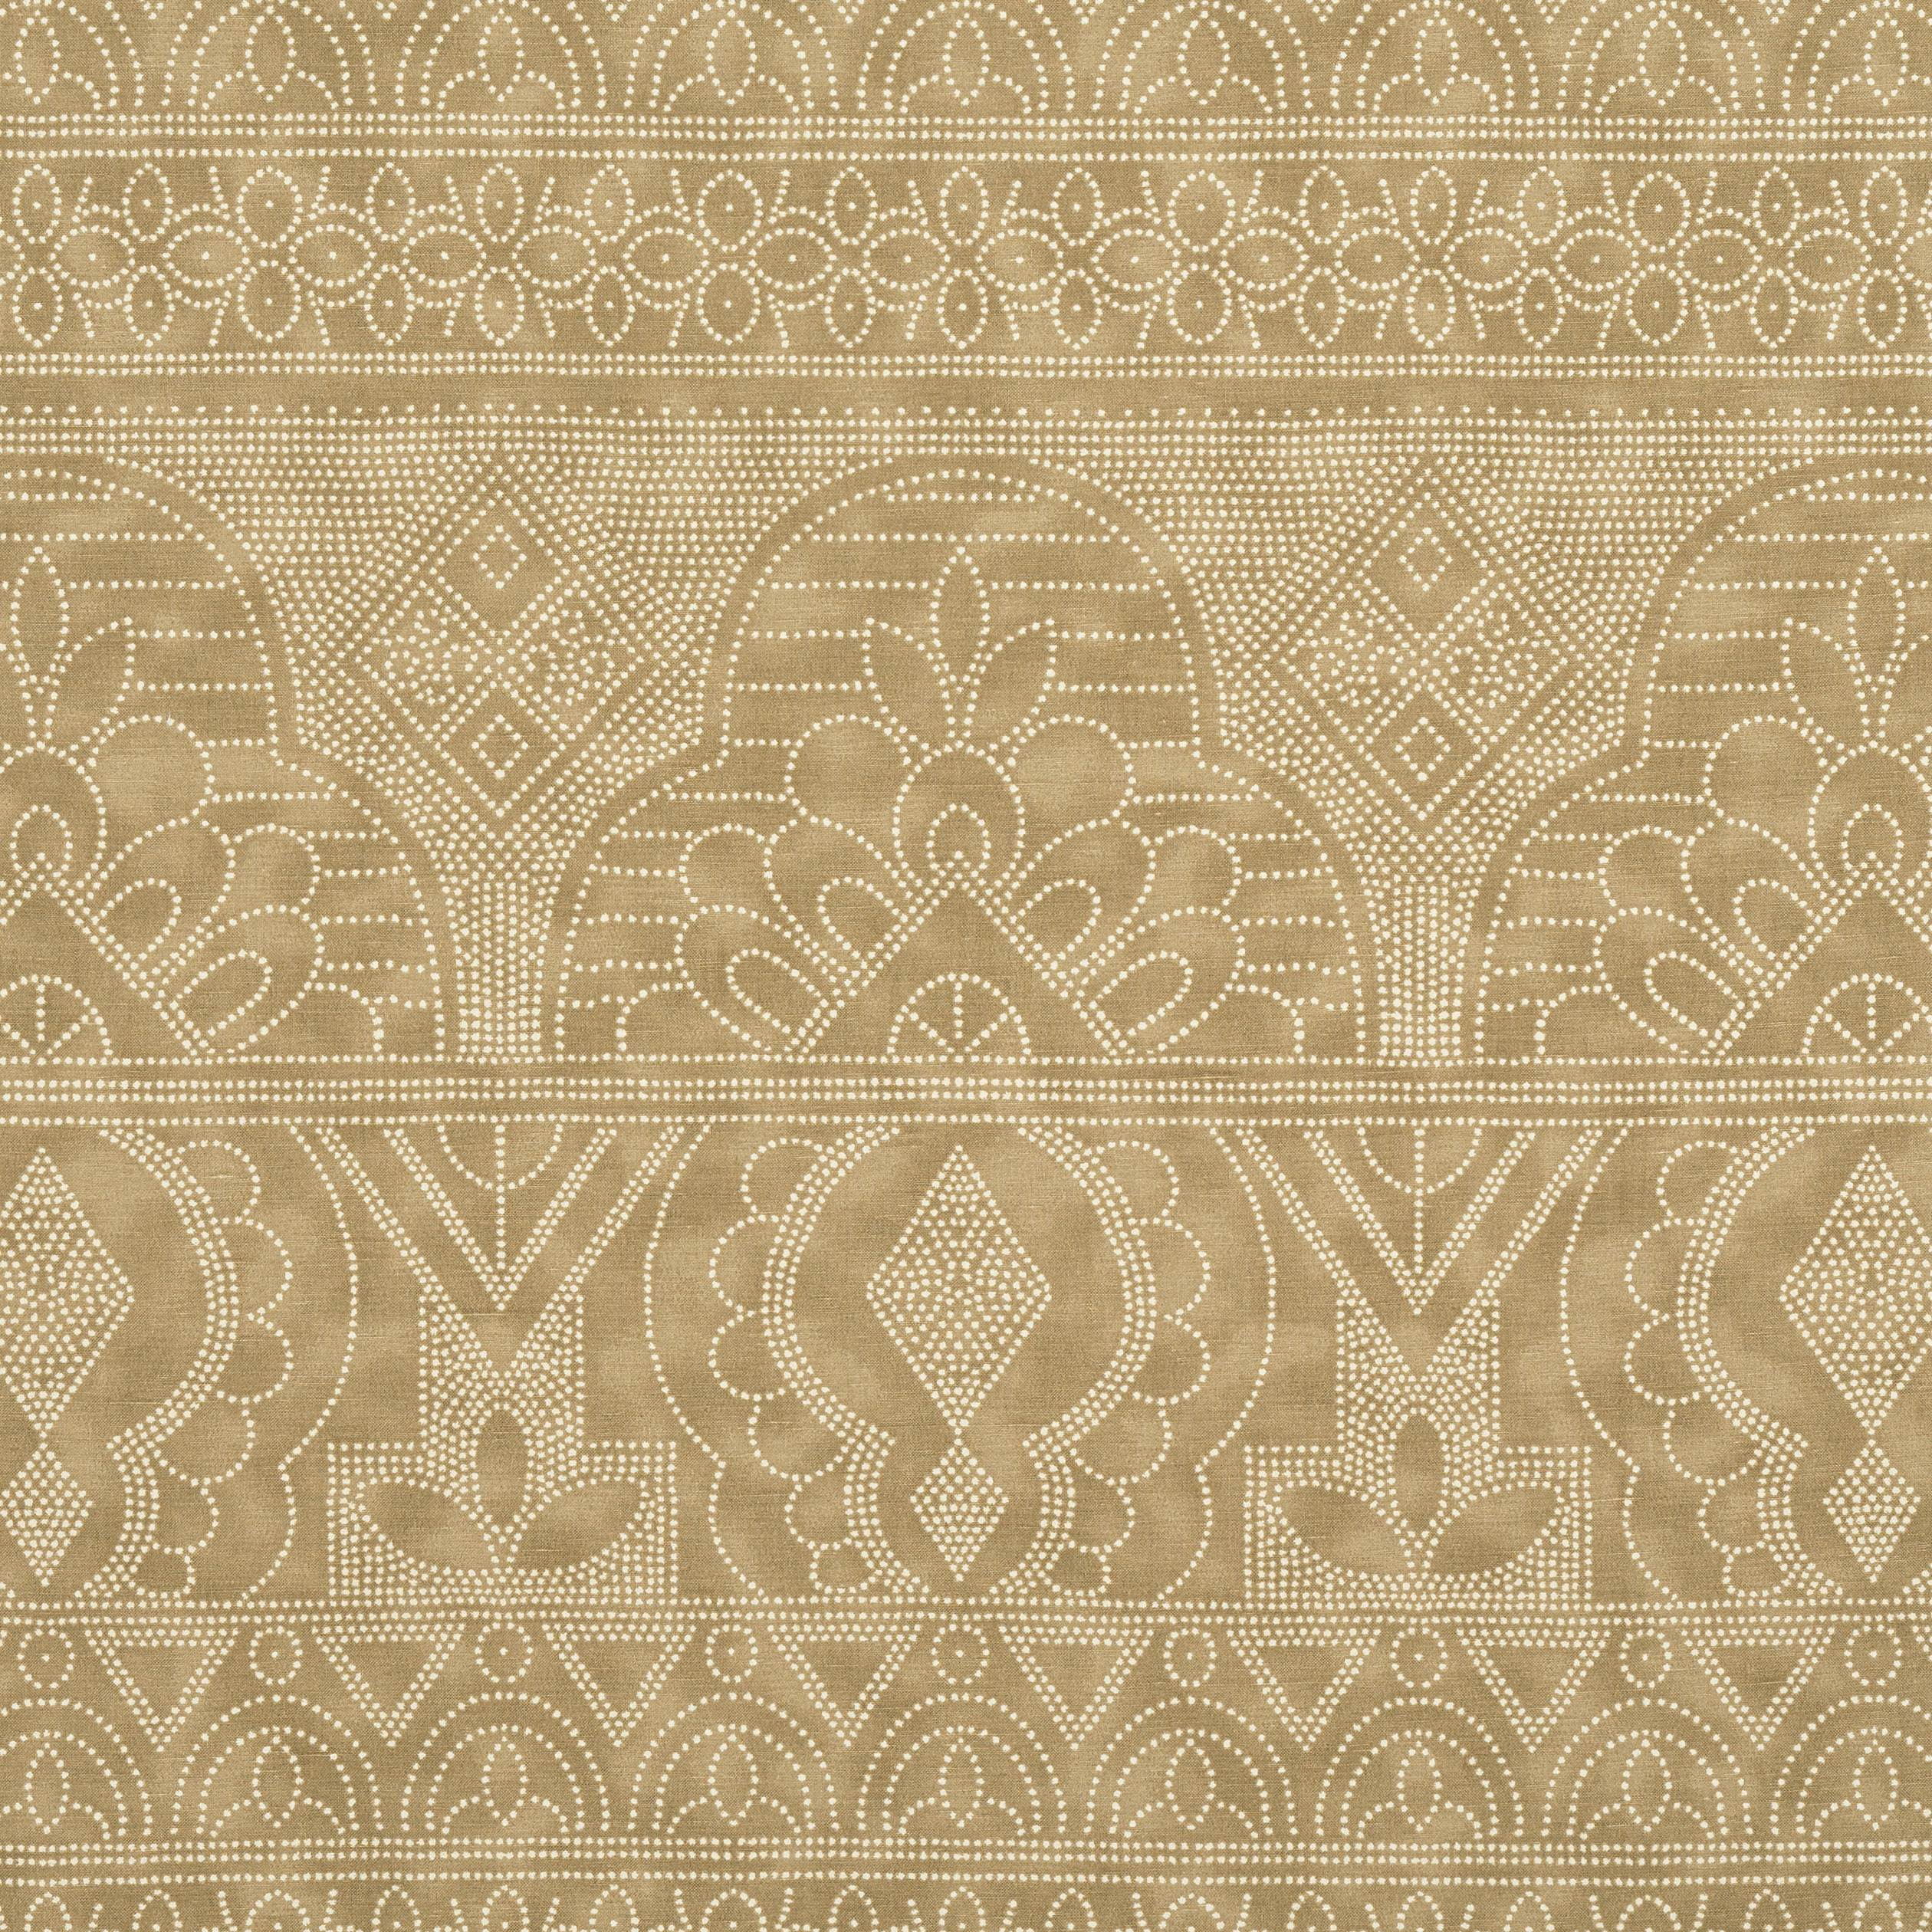 F981301 Thibaut MEDINAS collection Fabrics from Camel Printed Montecito the